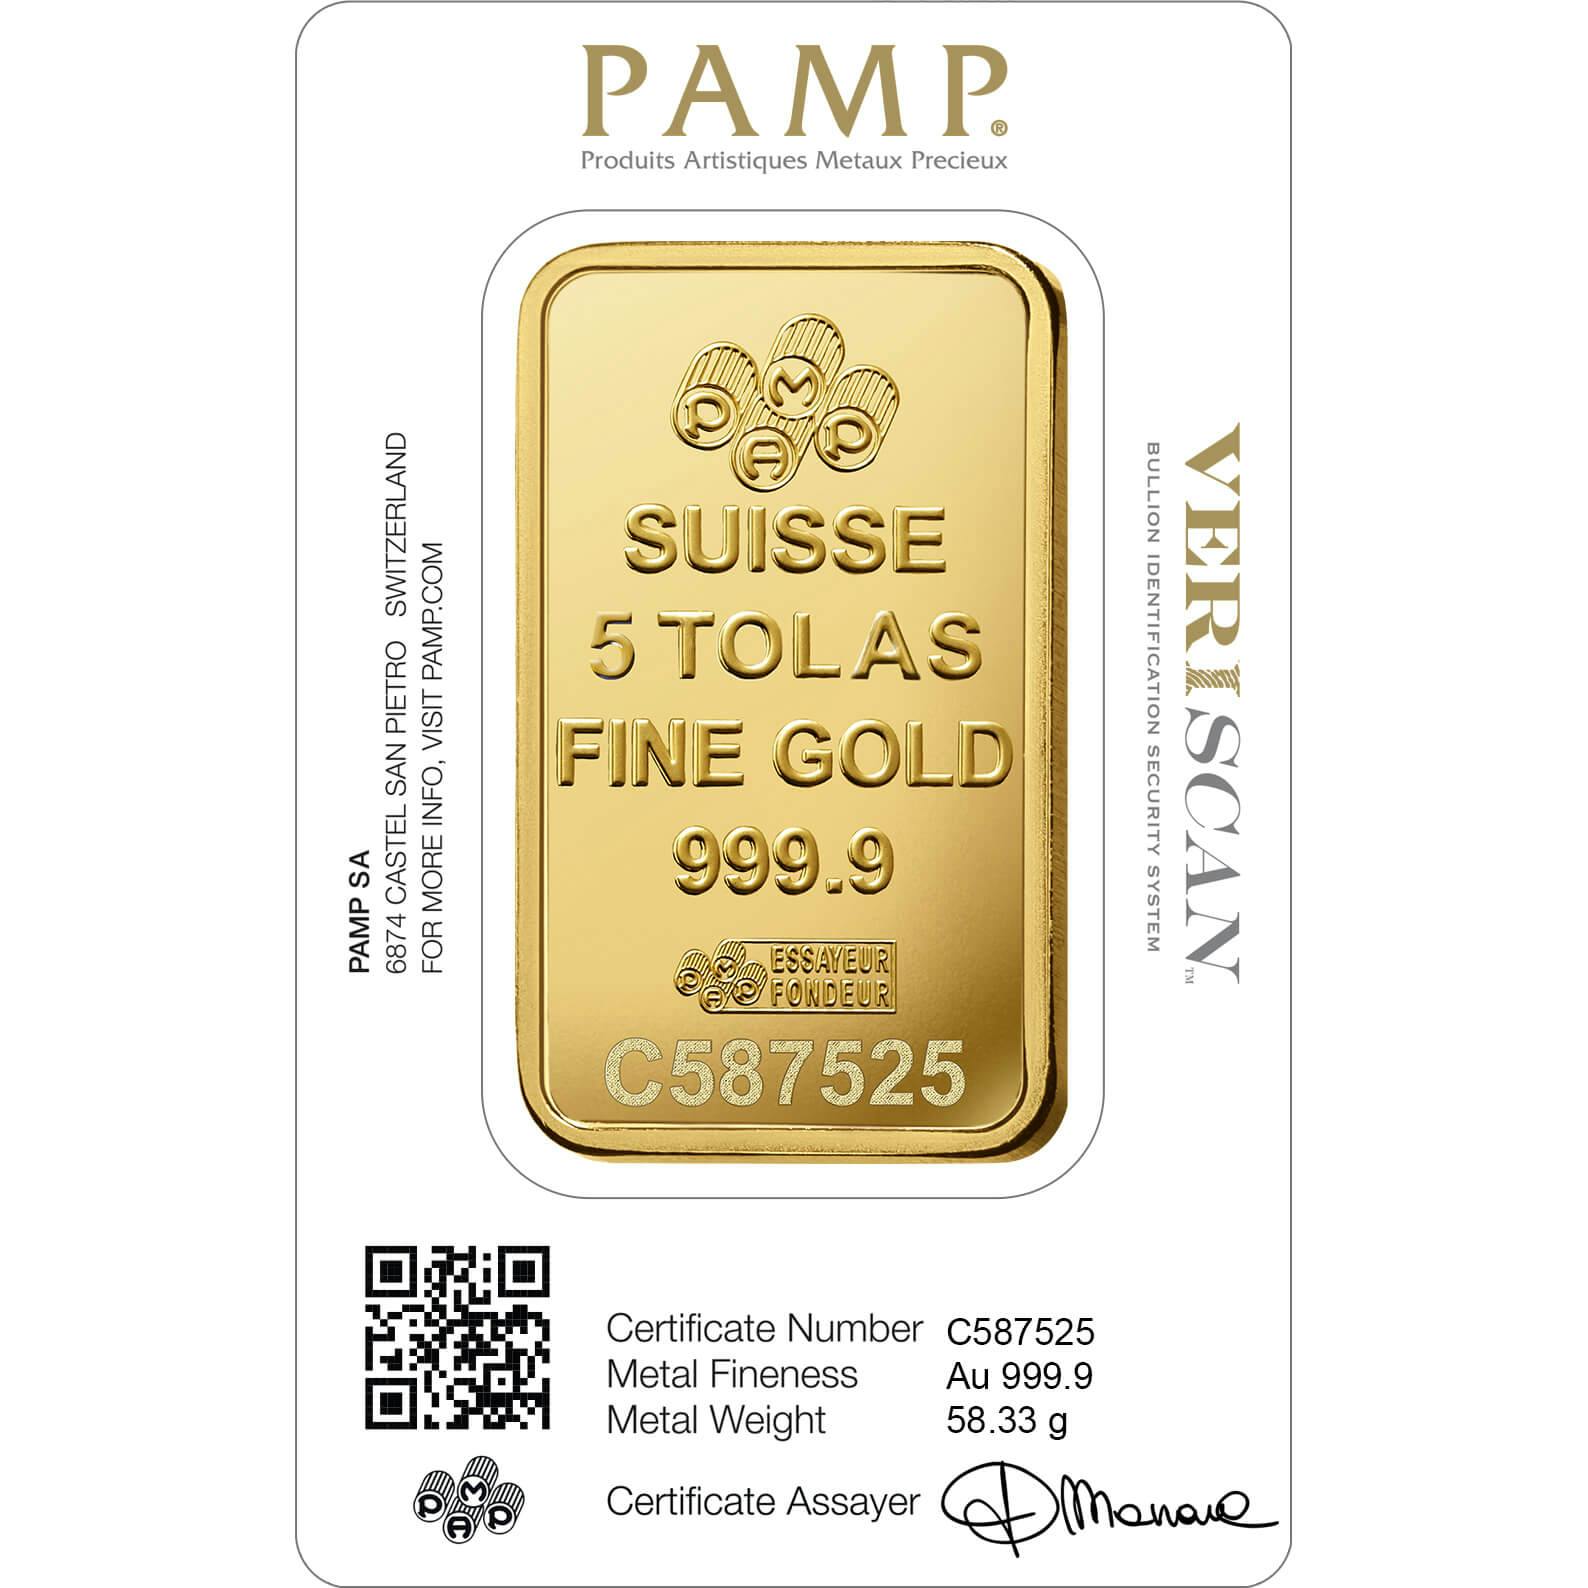 Invest in 5 tolas Fine Gold Lady Fortuna - PAMP Swiss - Back Veriscan